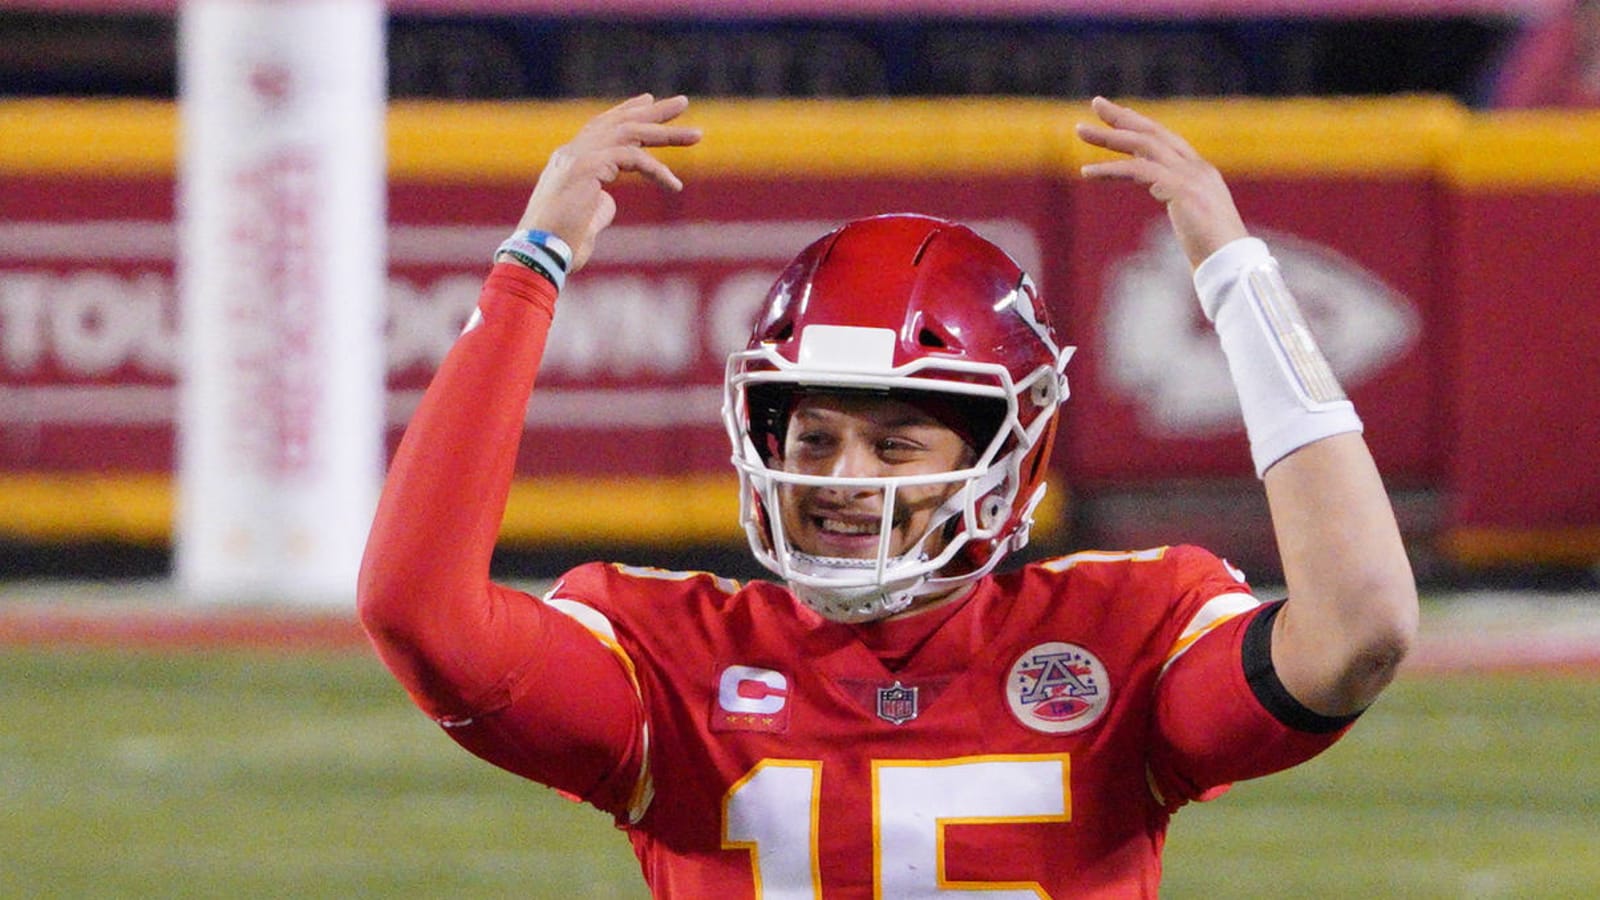 Chiefs QB Patrick Mahomes says he's reading defenses better than before